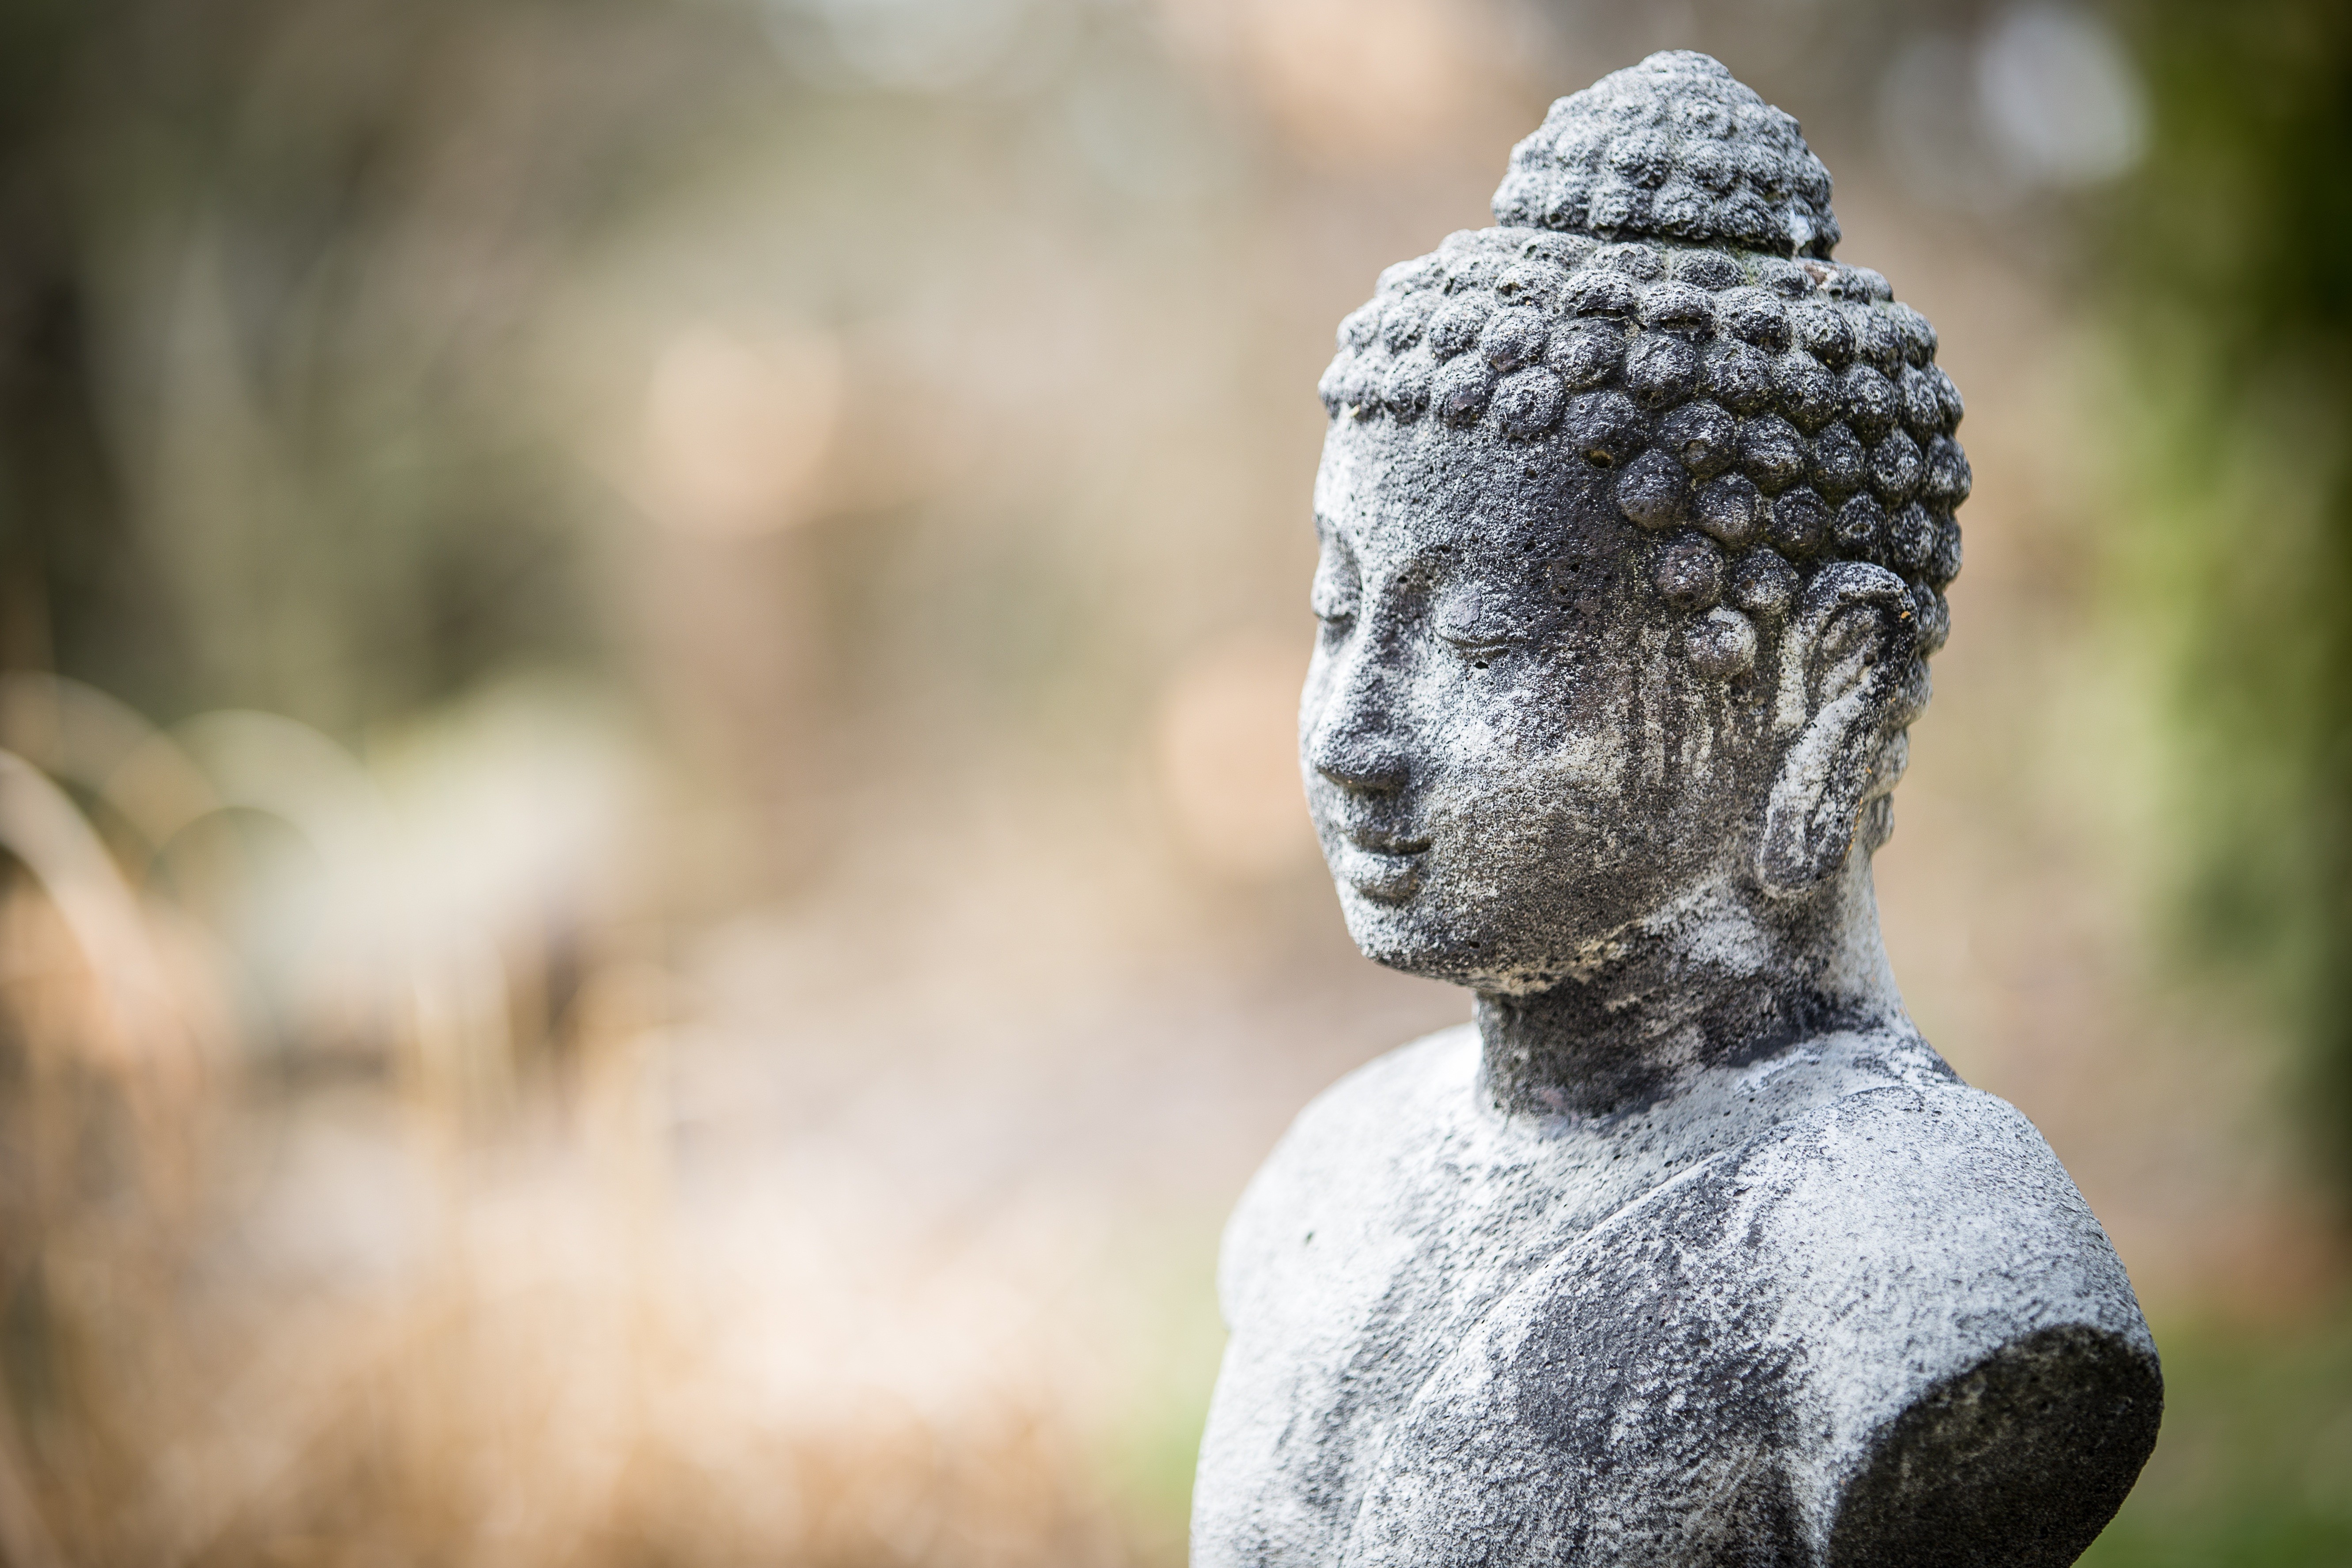 General 5324x3549 photography effects Buddha religion closeup statue